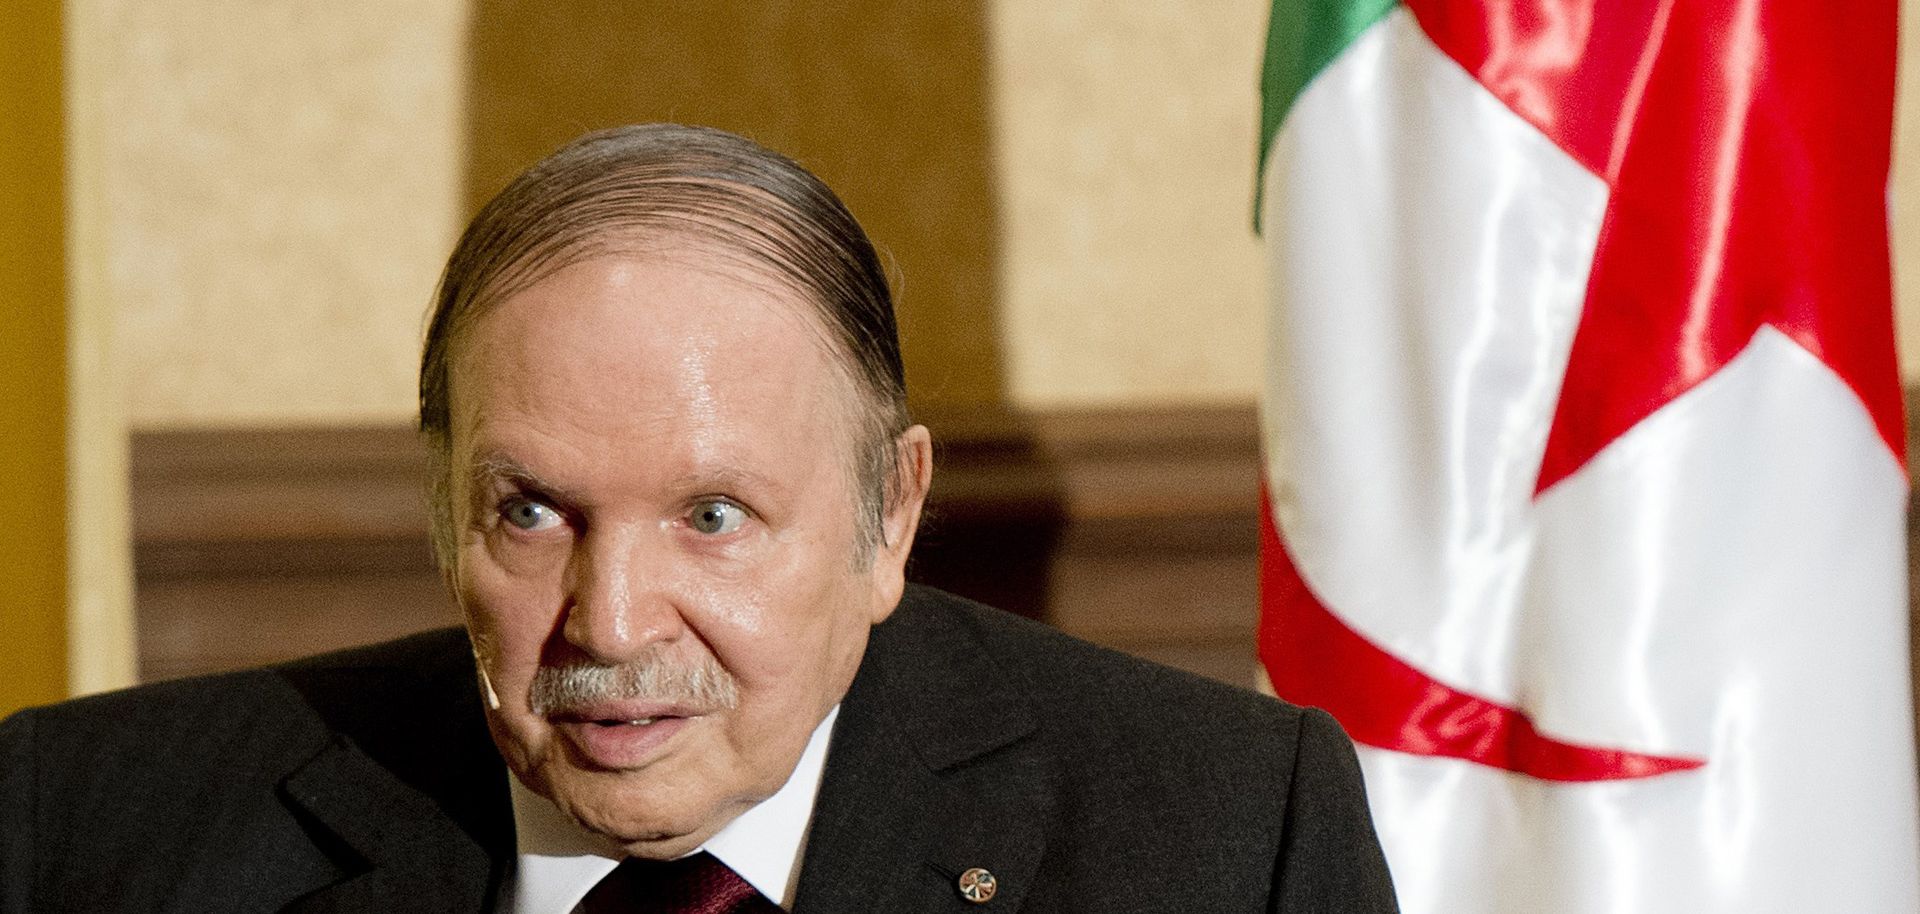 Algerian President Abdel Aziz Bouteflika is pictured at a meeting at the Zeralda private residence in Algiers.